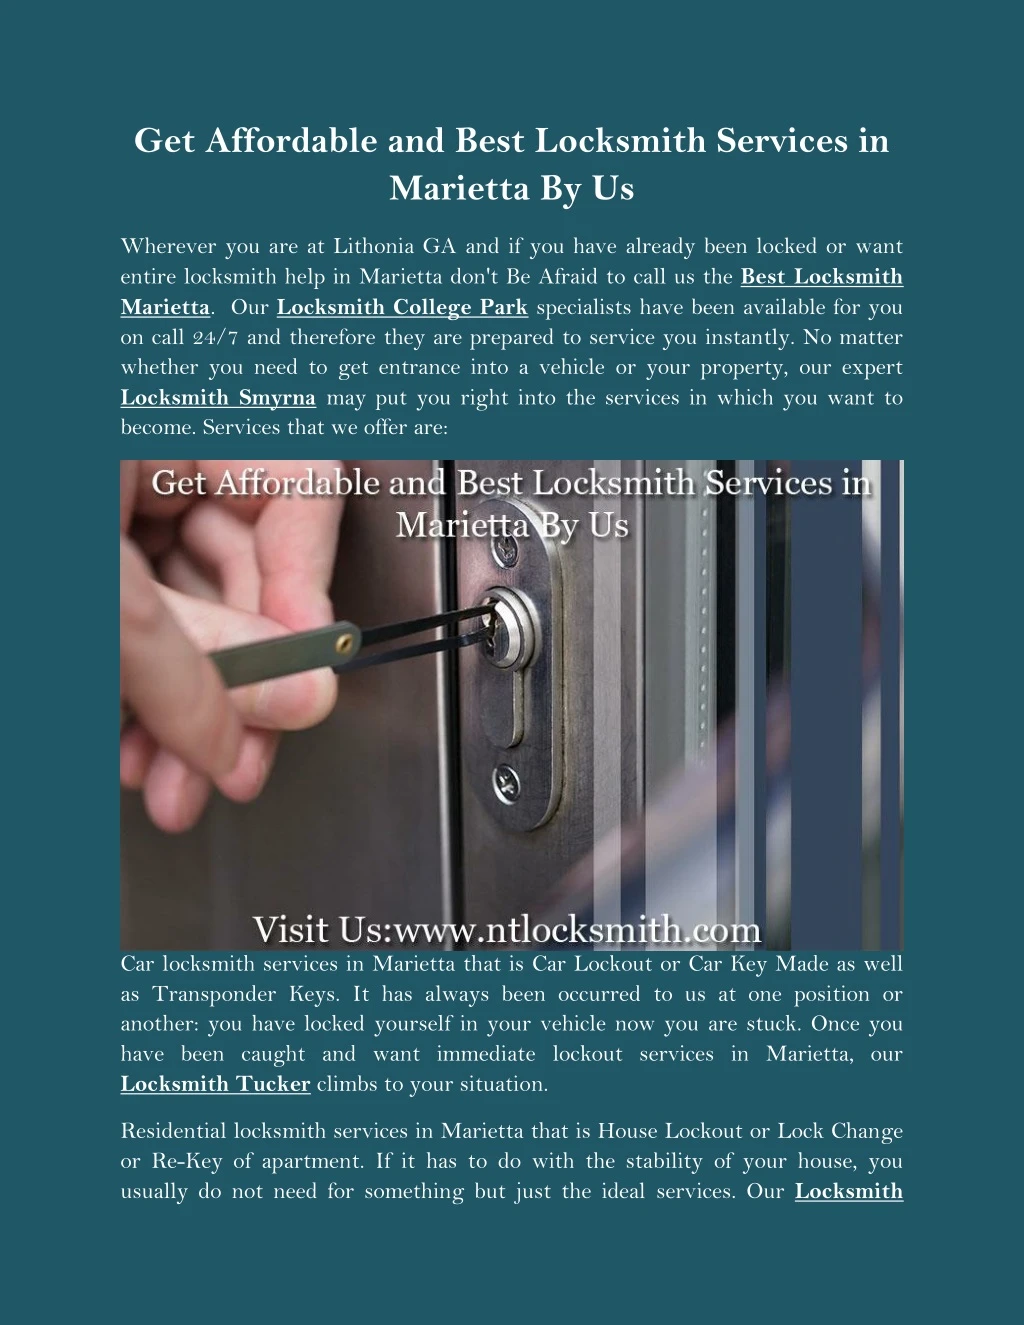 get affordable and best locksmith services